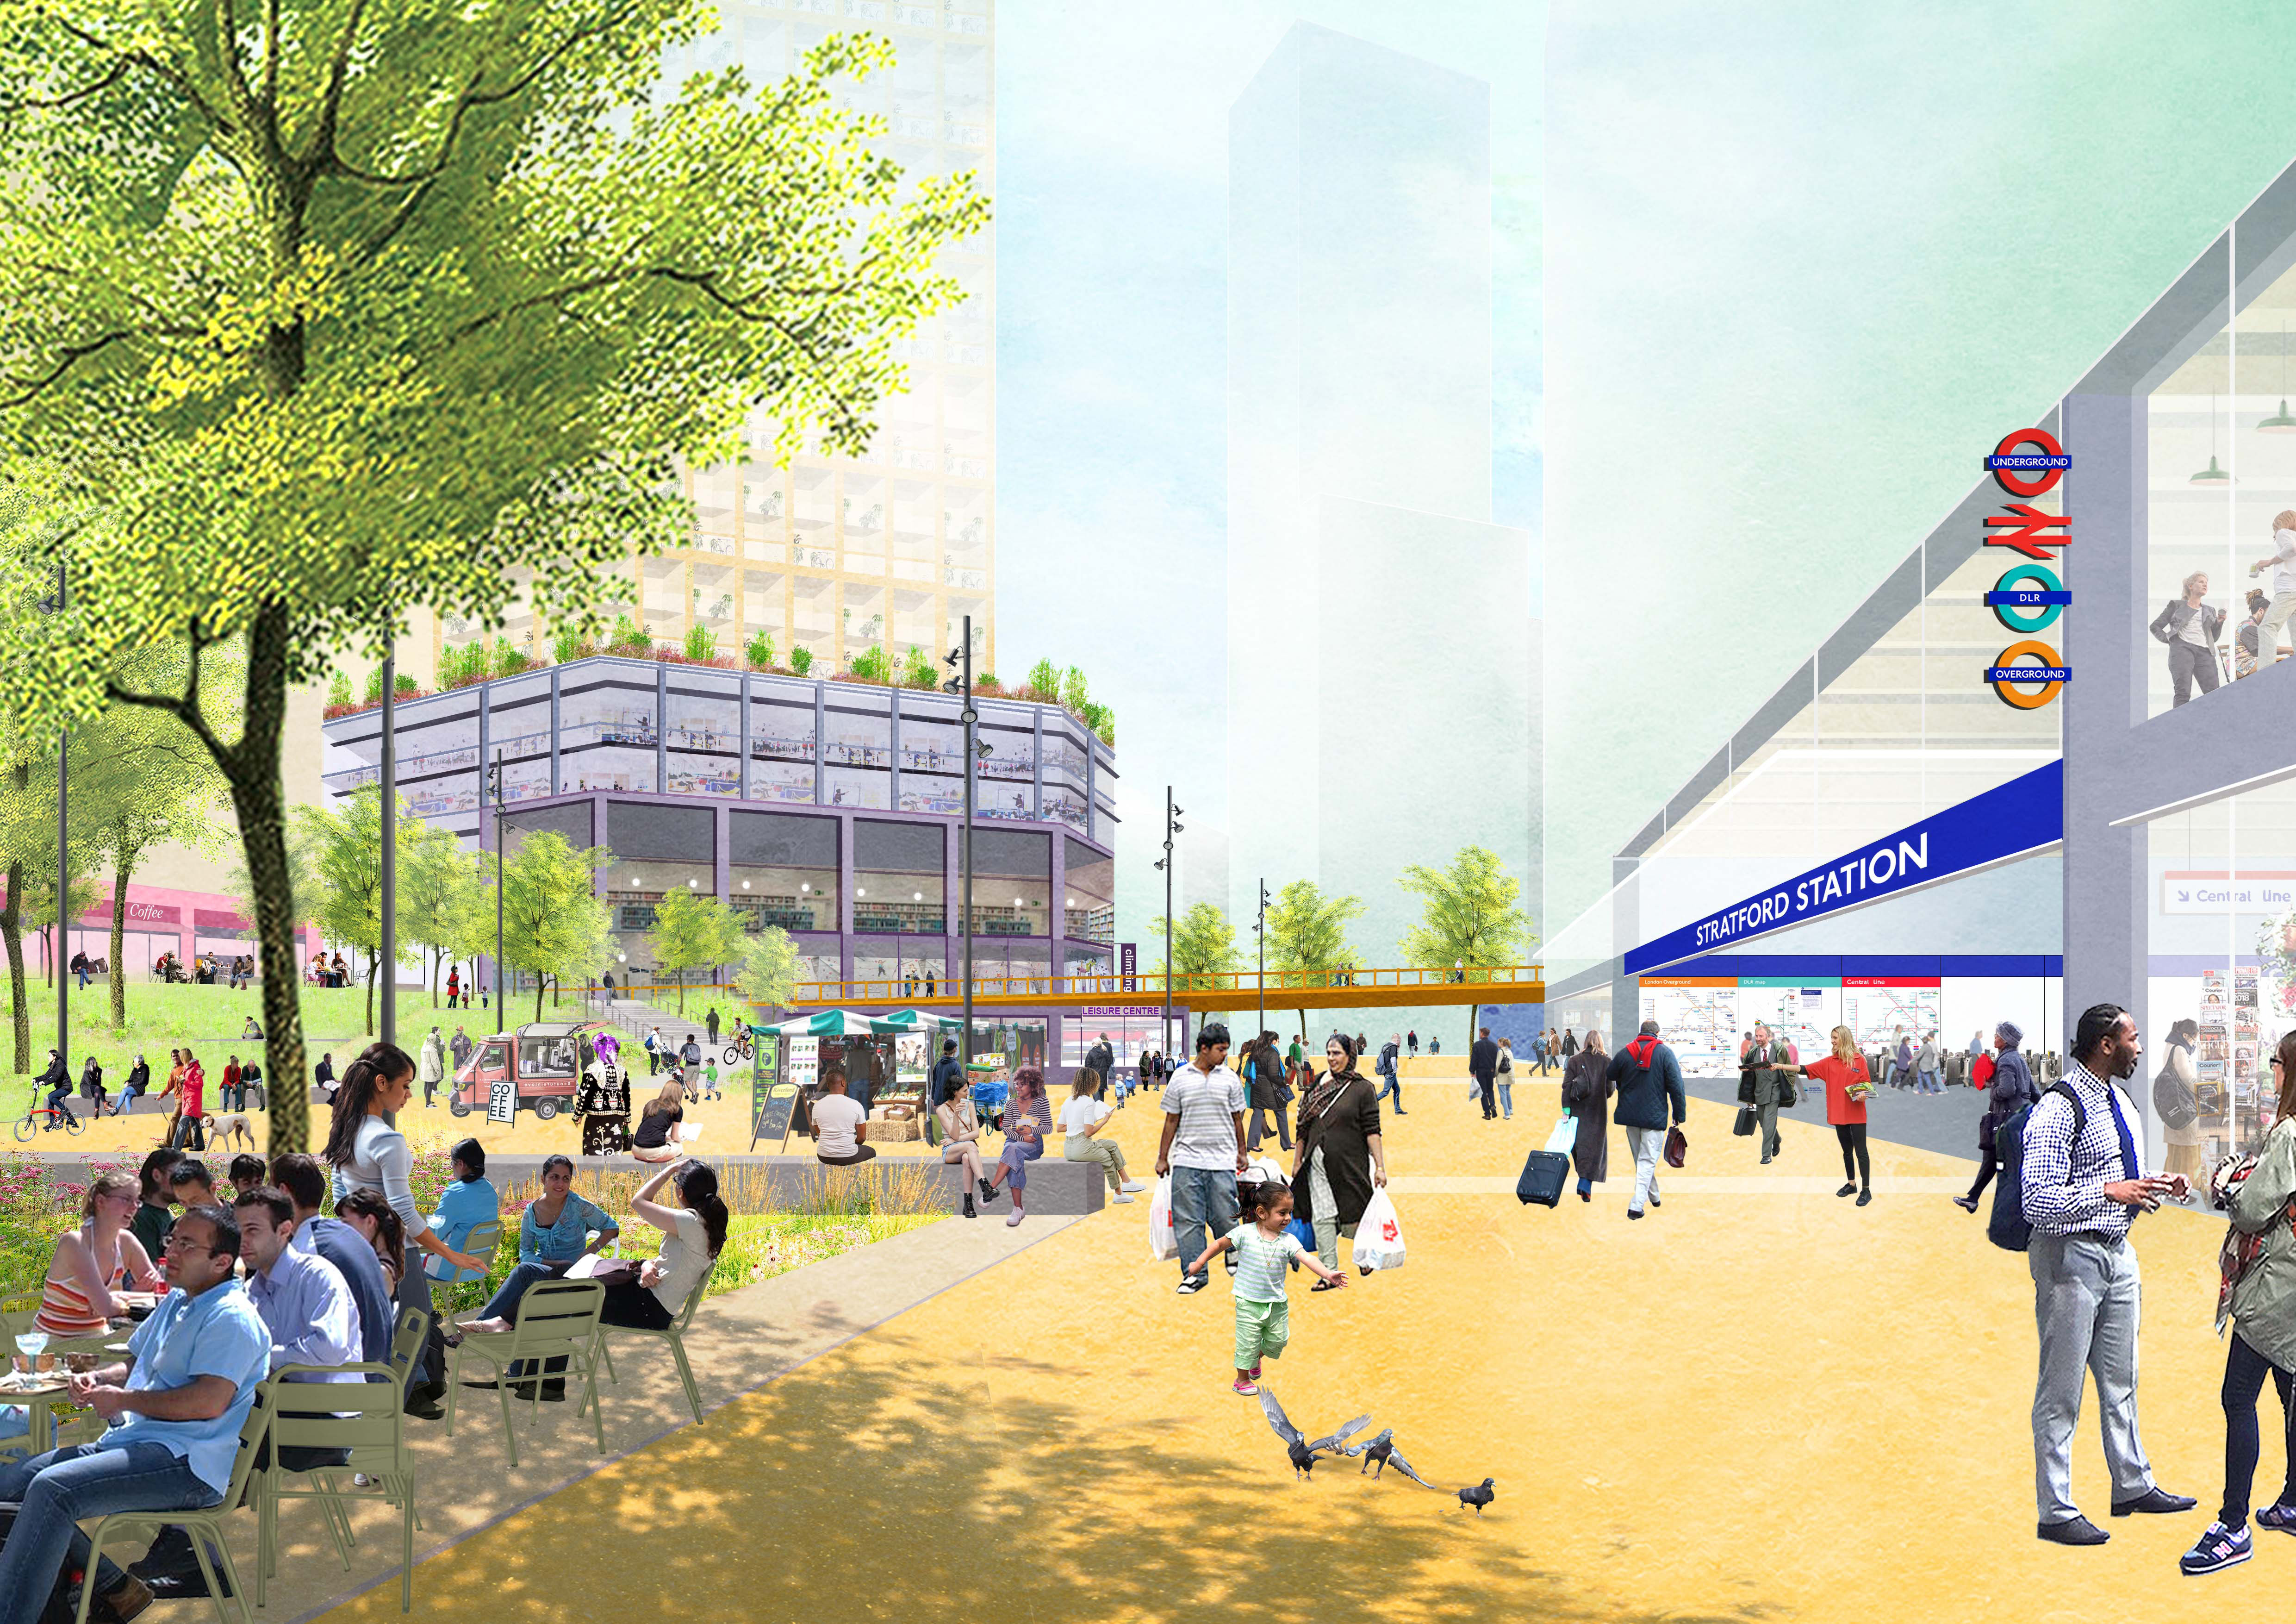 Stratford Station Investment Bid So East London Continues To Thrive – Newham Council